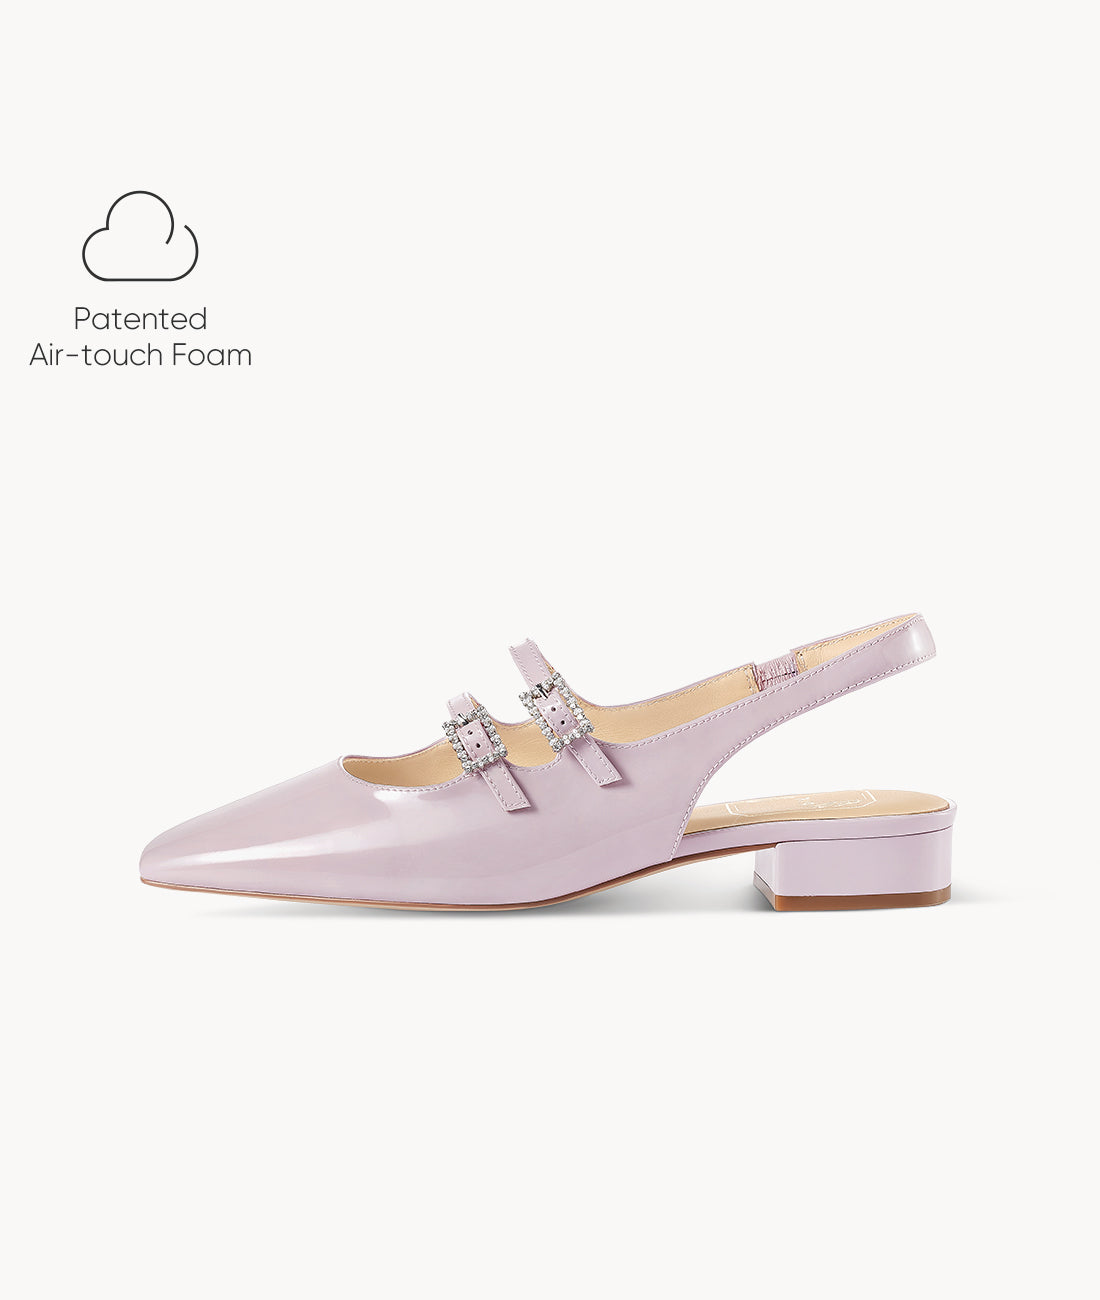 Bauhinia Mary Jane-Square-toe pink Slingback Flat with 25mm heel